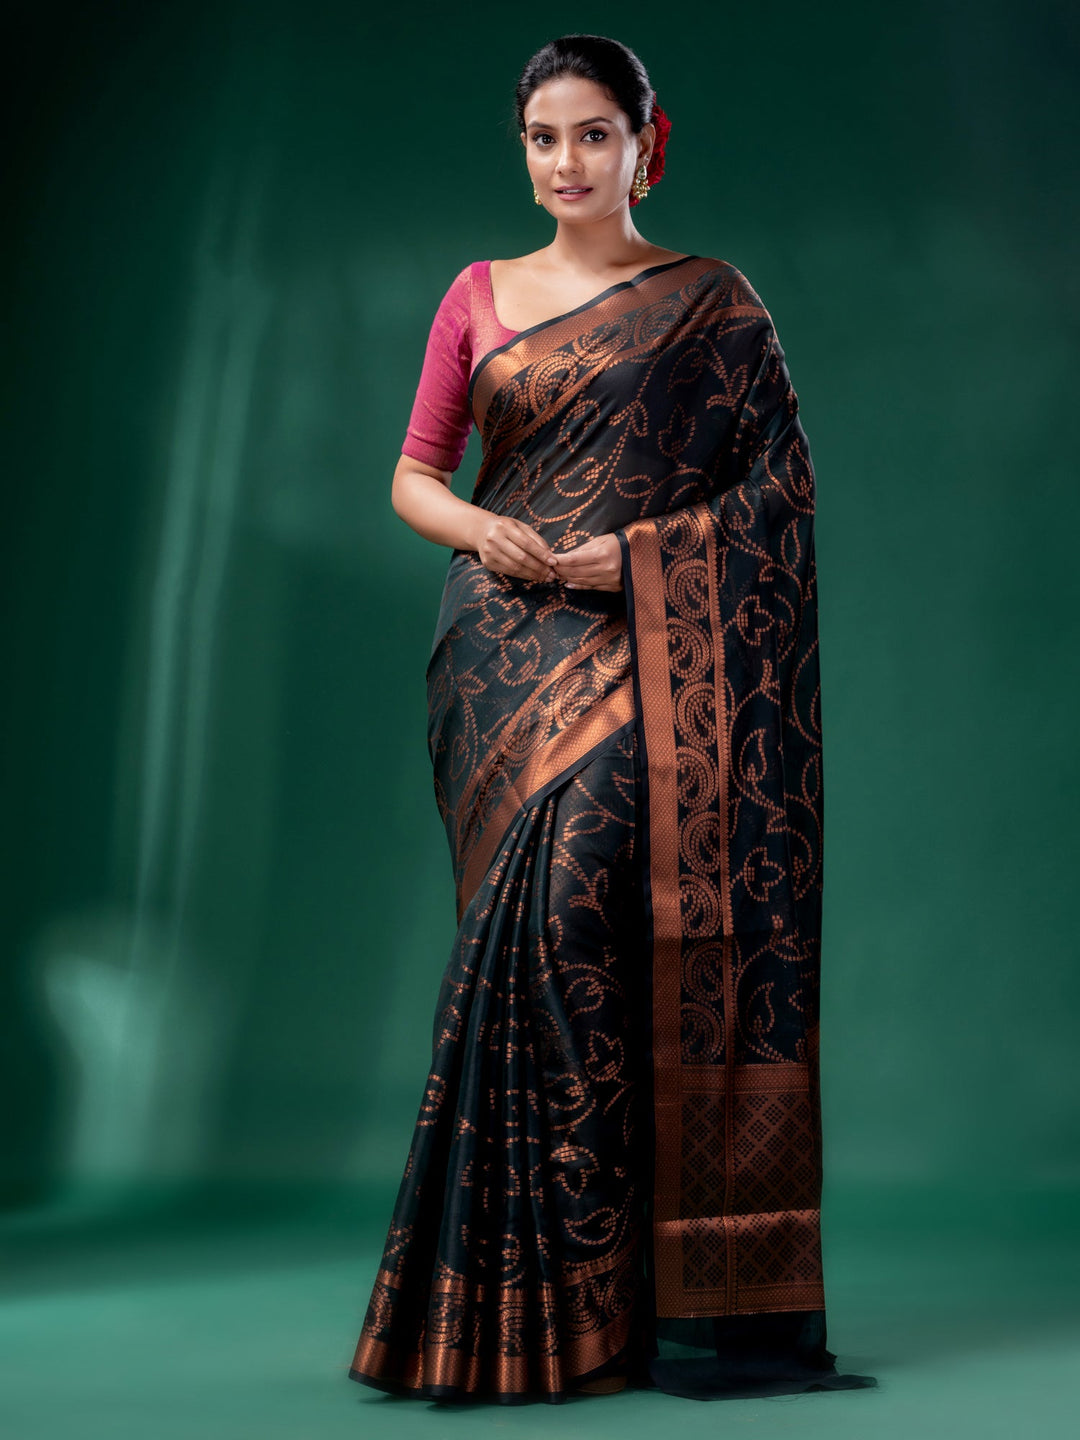 CHARUKRITI Bottle Green Cotton Silk Saree with Woven Design with Unstitched Blouse